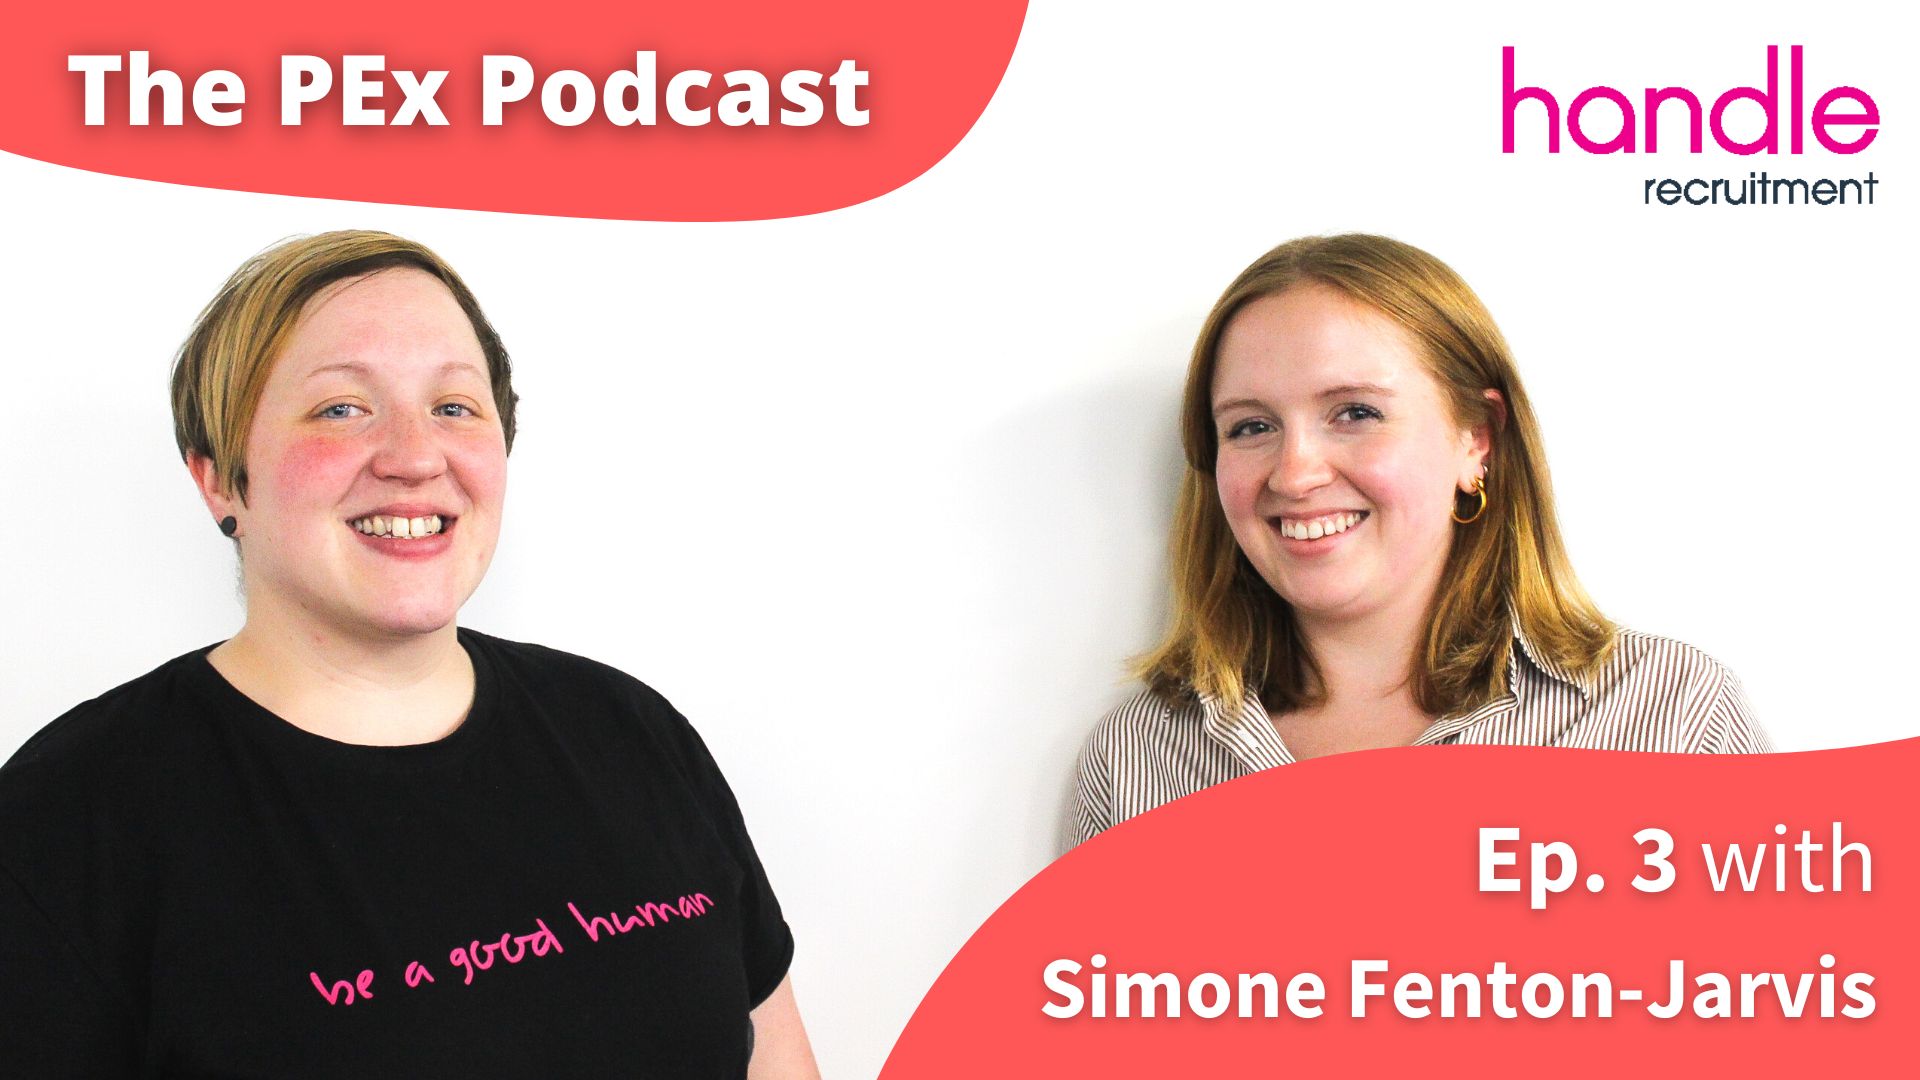 NEW PODCAST: Finding your workplace ’why’, with Simone Fenton-Jarvis